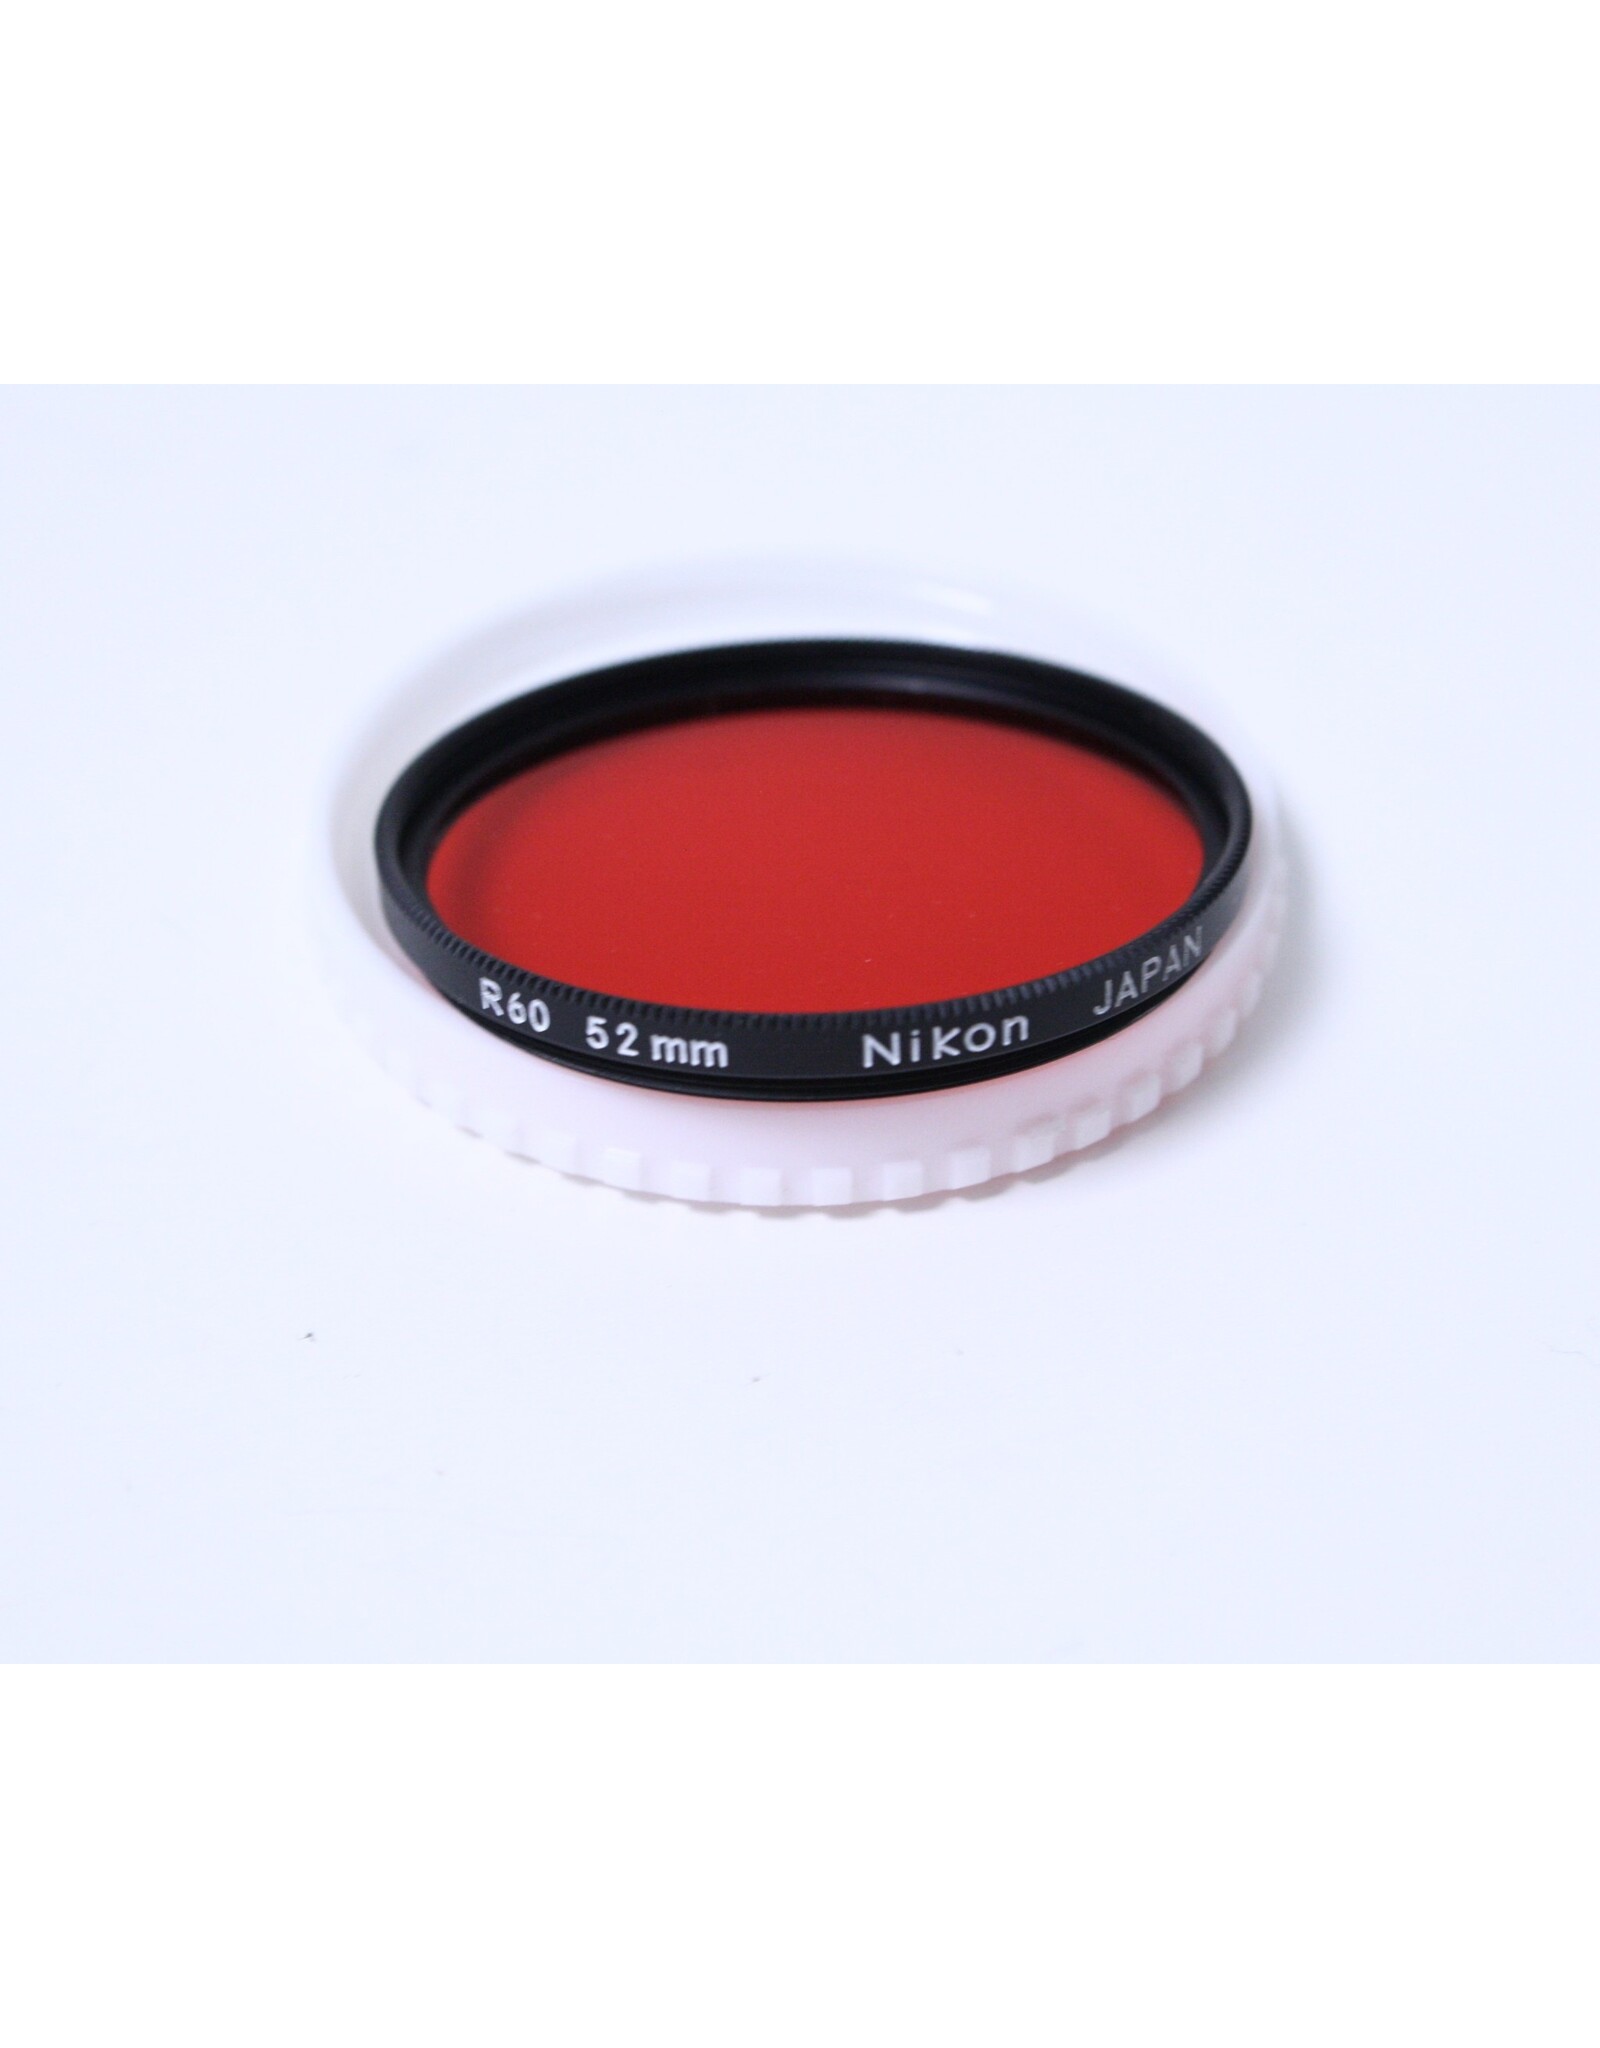 Nikon 52mm R60 Red Filter  (Pre-owned)